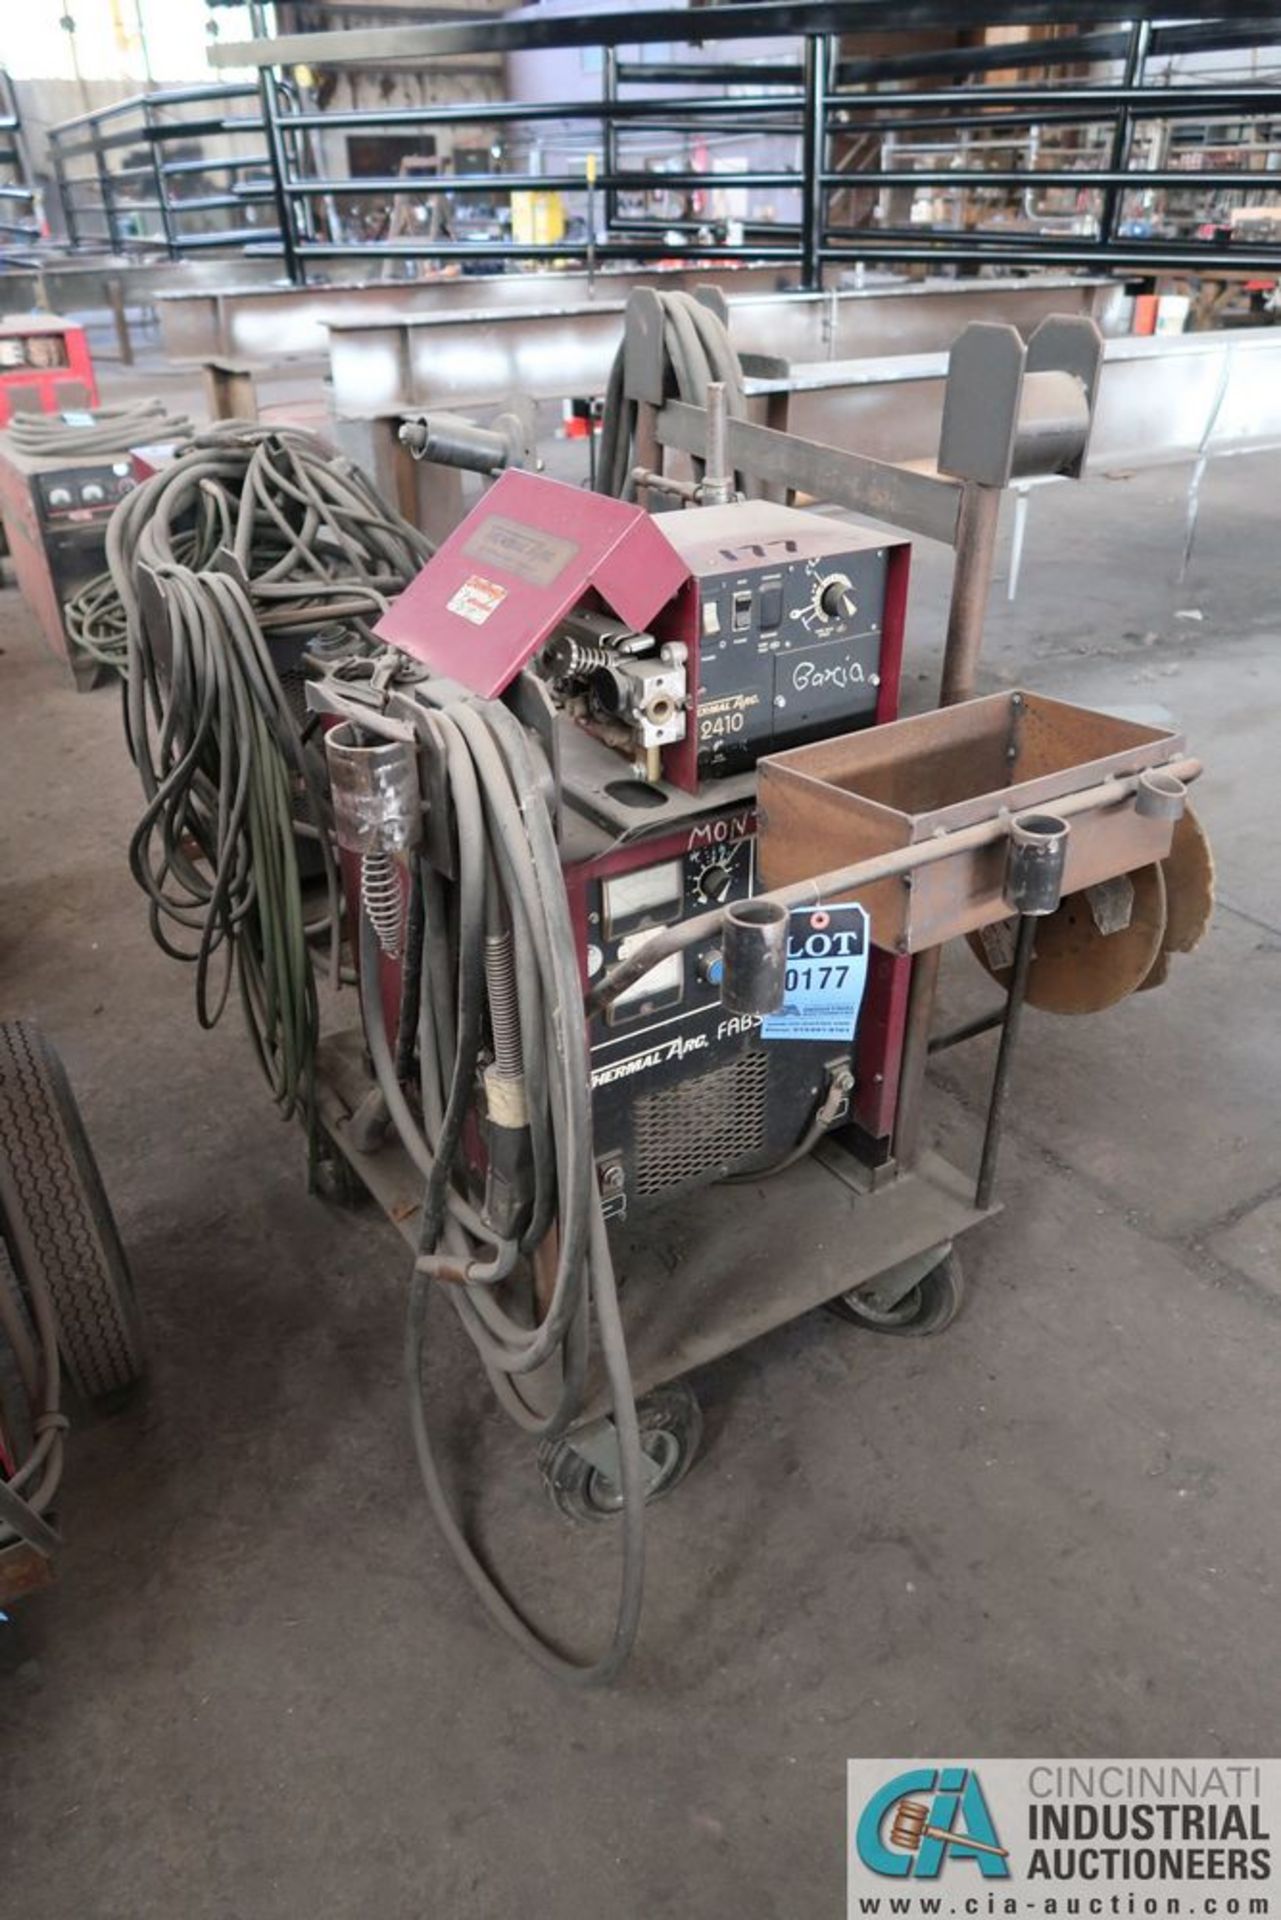 400 AMP THERMAL ARC FABSTAR 4030 WELDER WITH THERMAL ARC 2410 WIRE FEED